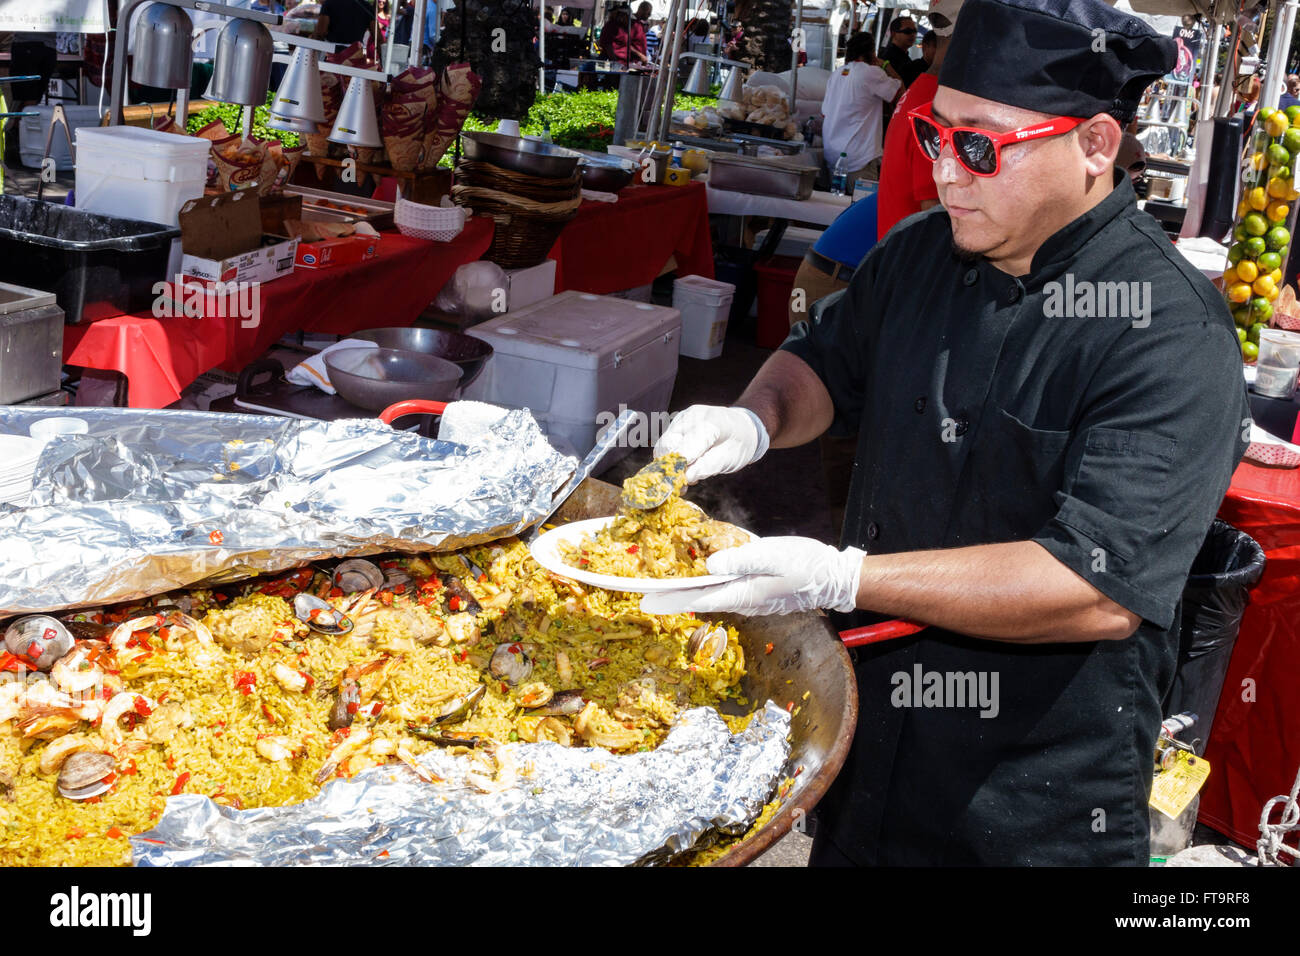 Miami Florida,Coral Gables,Carnaval Carnival Miracle Mile,street festival,annual celebration,Hispanic ethnic adult,adults,man men male,cook,chef,stall Stock Photo